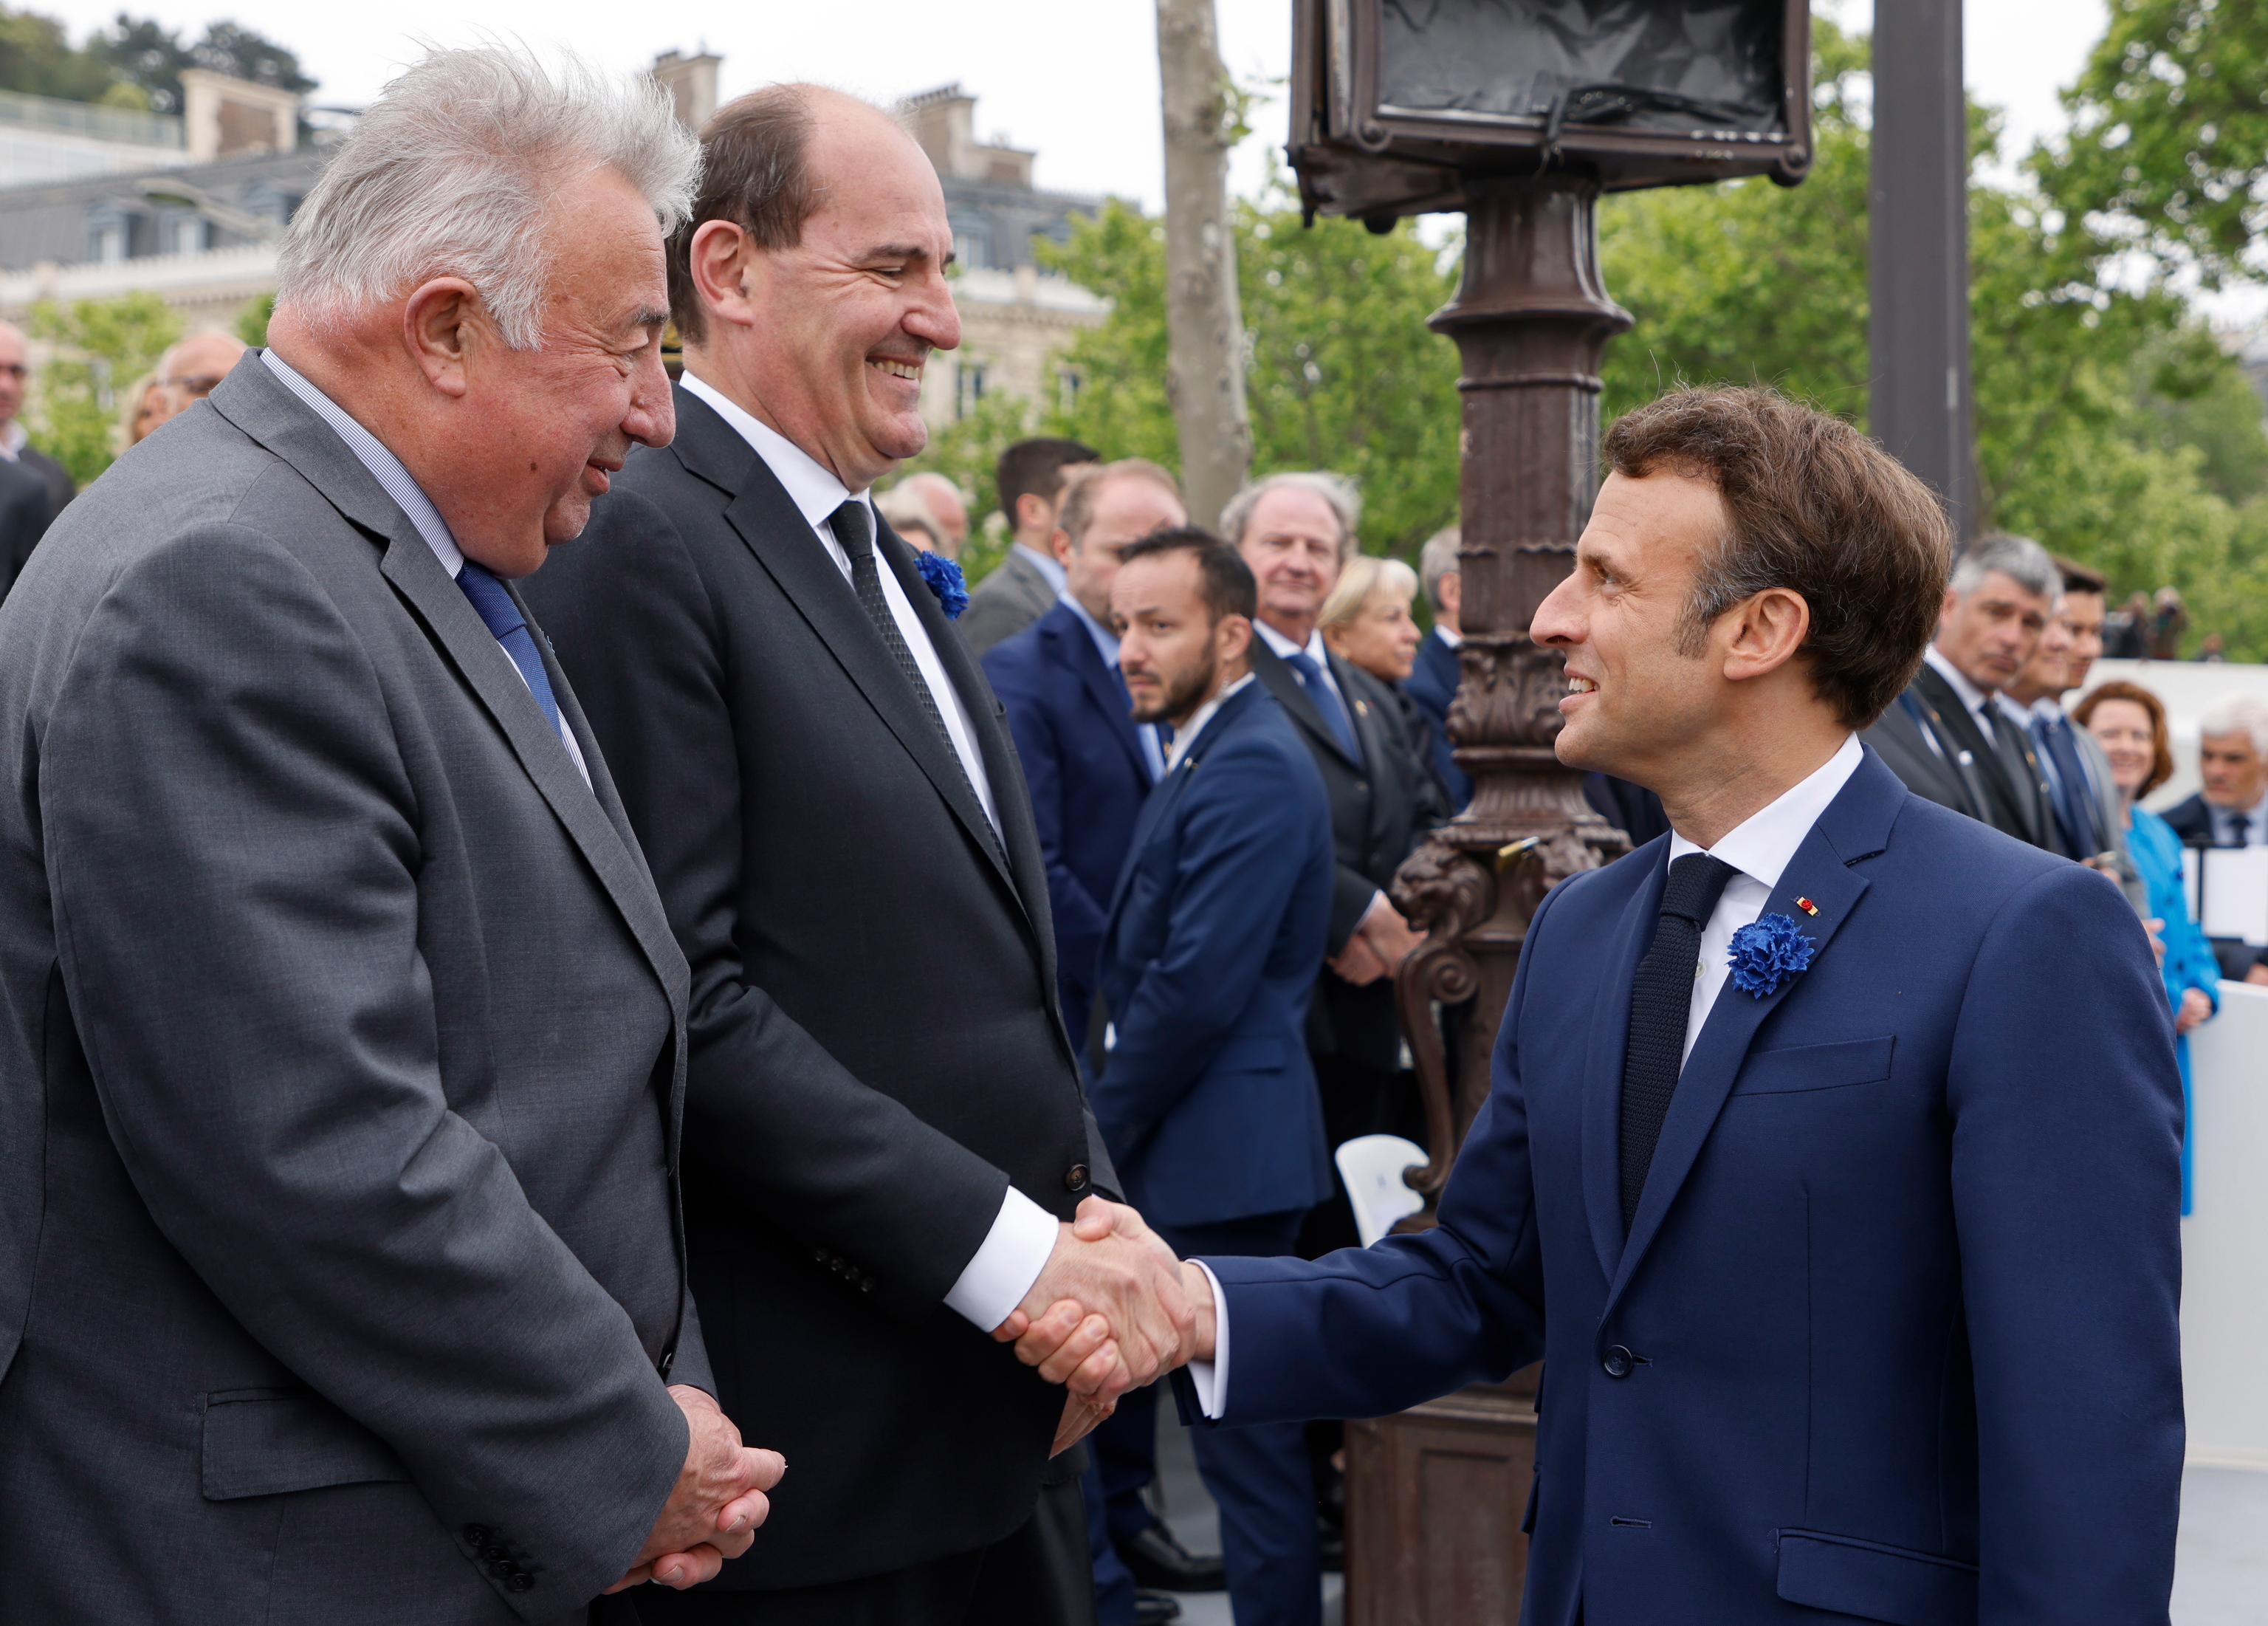 On the right, French President Emmanuel Macron congratulates Prime Minister Jean Casteux, on the left